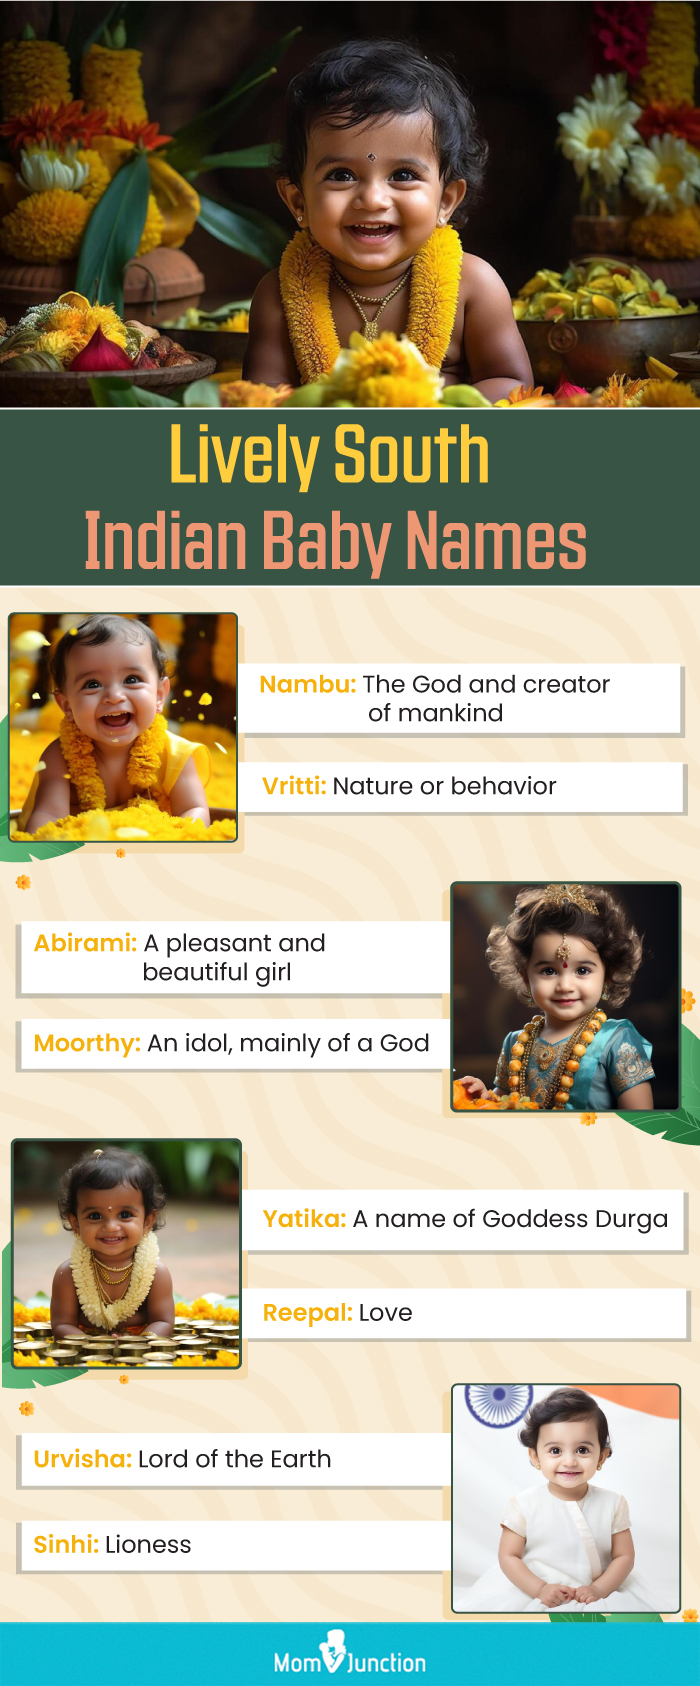 lively south indian baby names (infographic)